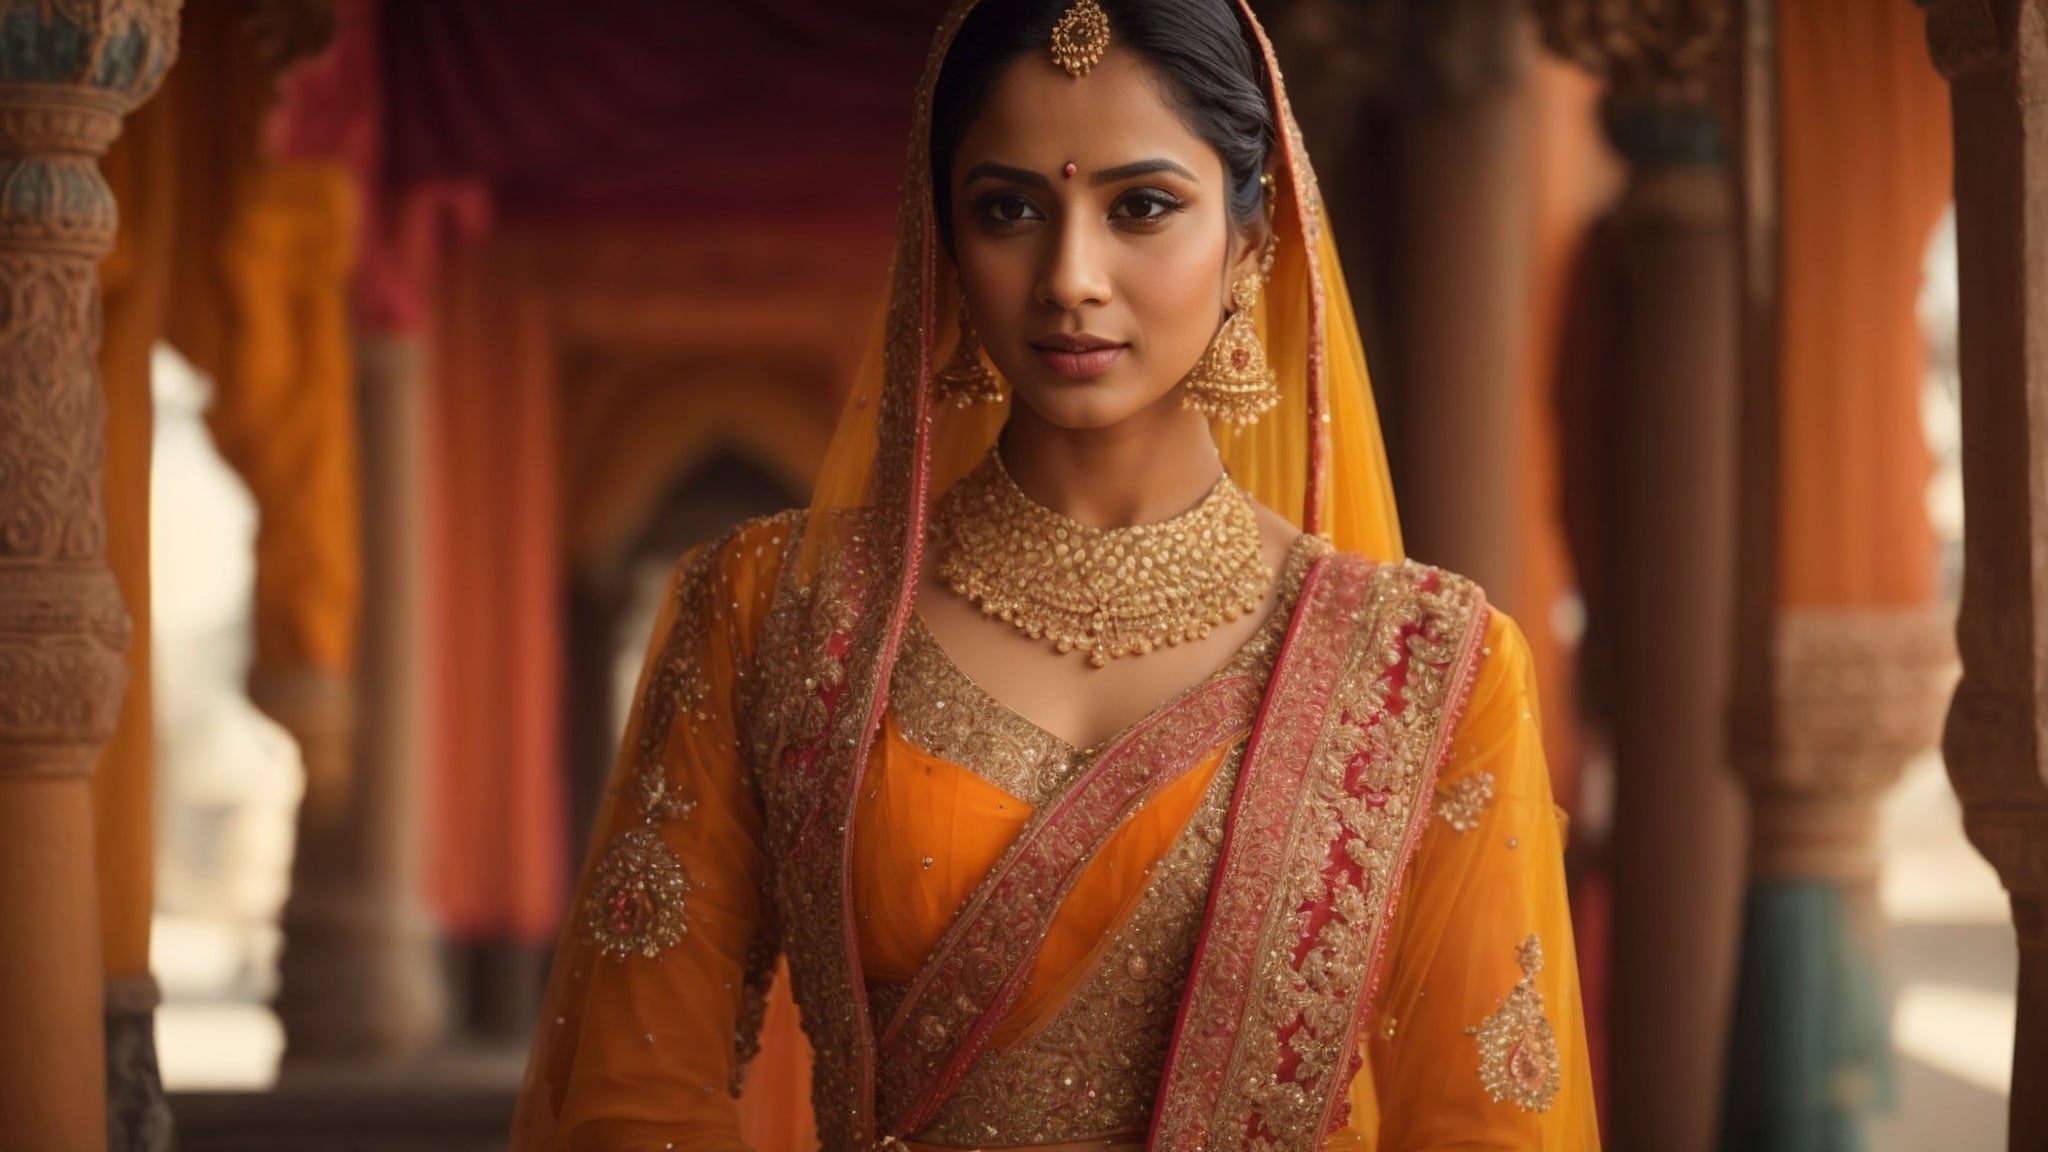 Lehenga Customization Tips: Adding Personal Touches to Your Outfit